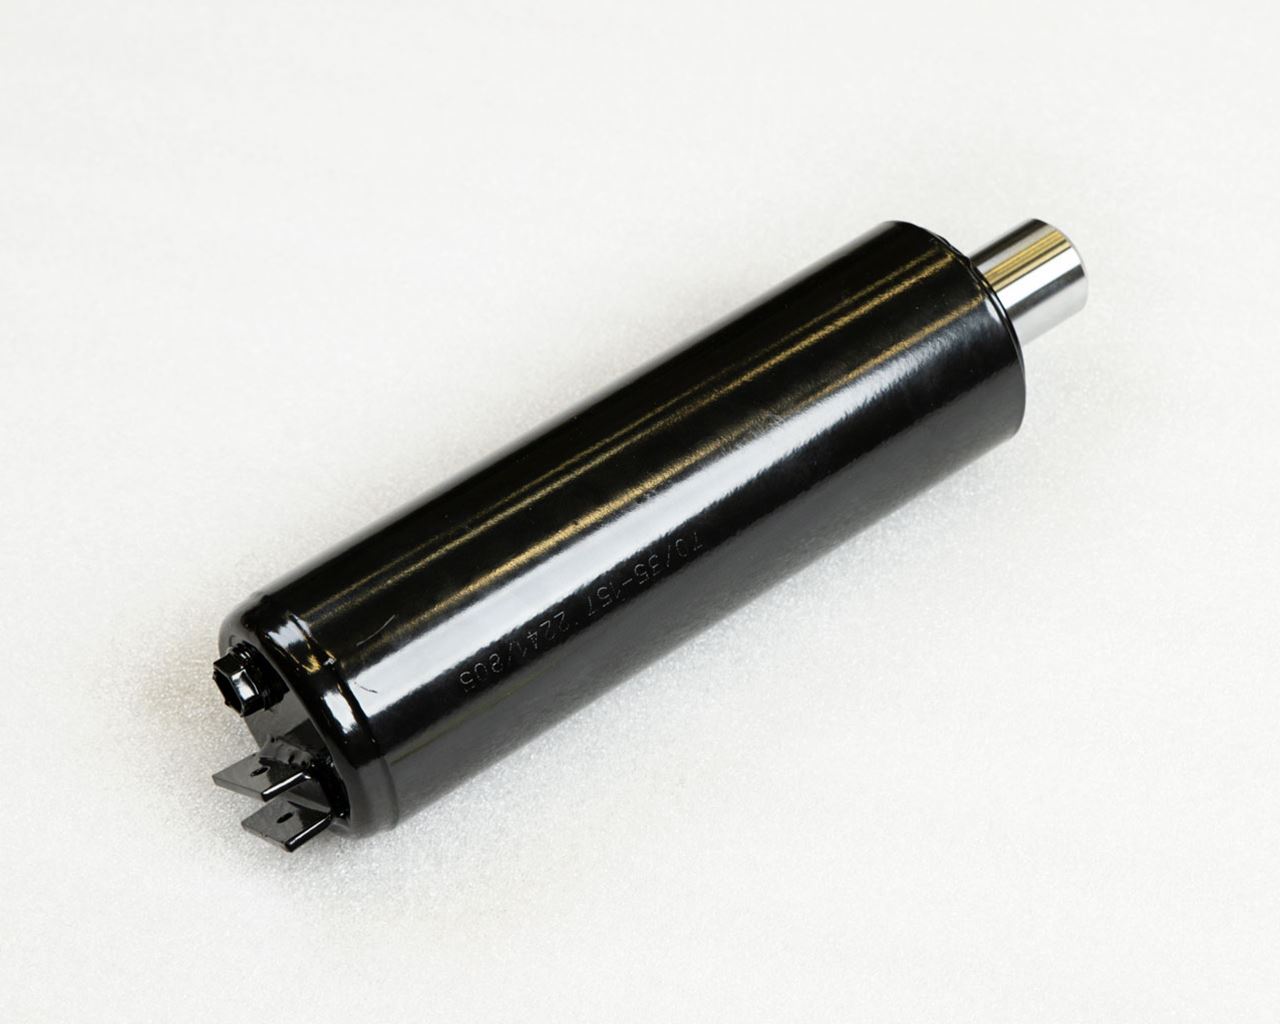 Lift table spare part - Hydraulic cylinder HC70/35-157